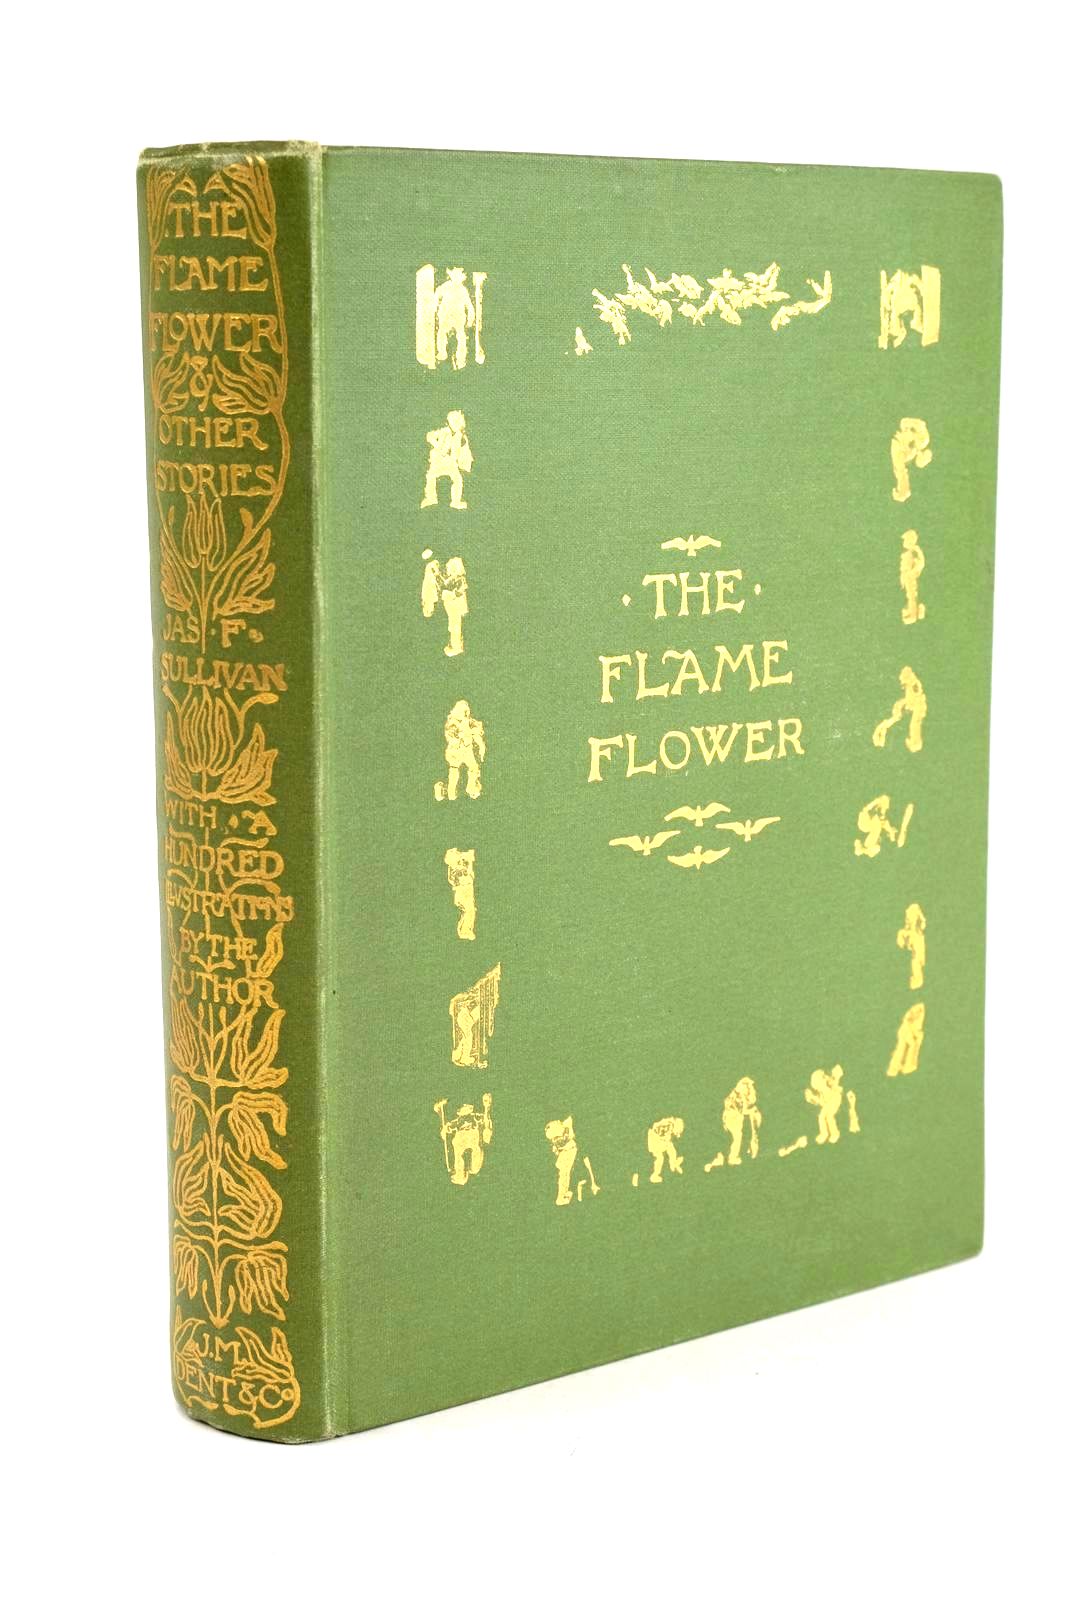 Photo of THE FLAME-FLOWER AND OTHER STORIES written by Sullivan, Jas. F. illustrated by Sullivan, Jas. F. published by J.M. Dent & Co. (STOCK CODE: 1324242)  for sale by Stella & Rose's Books